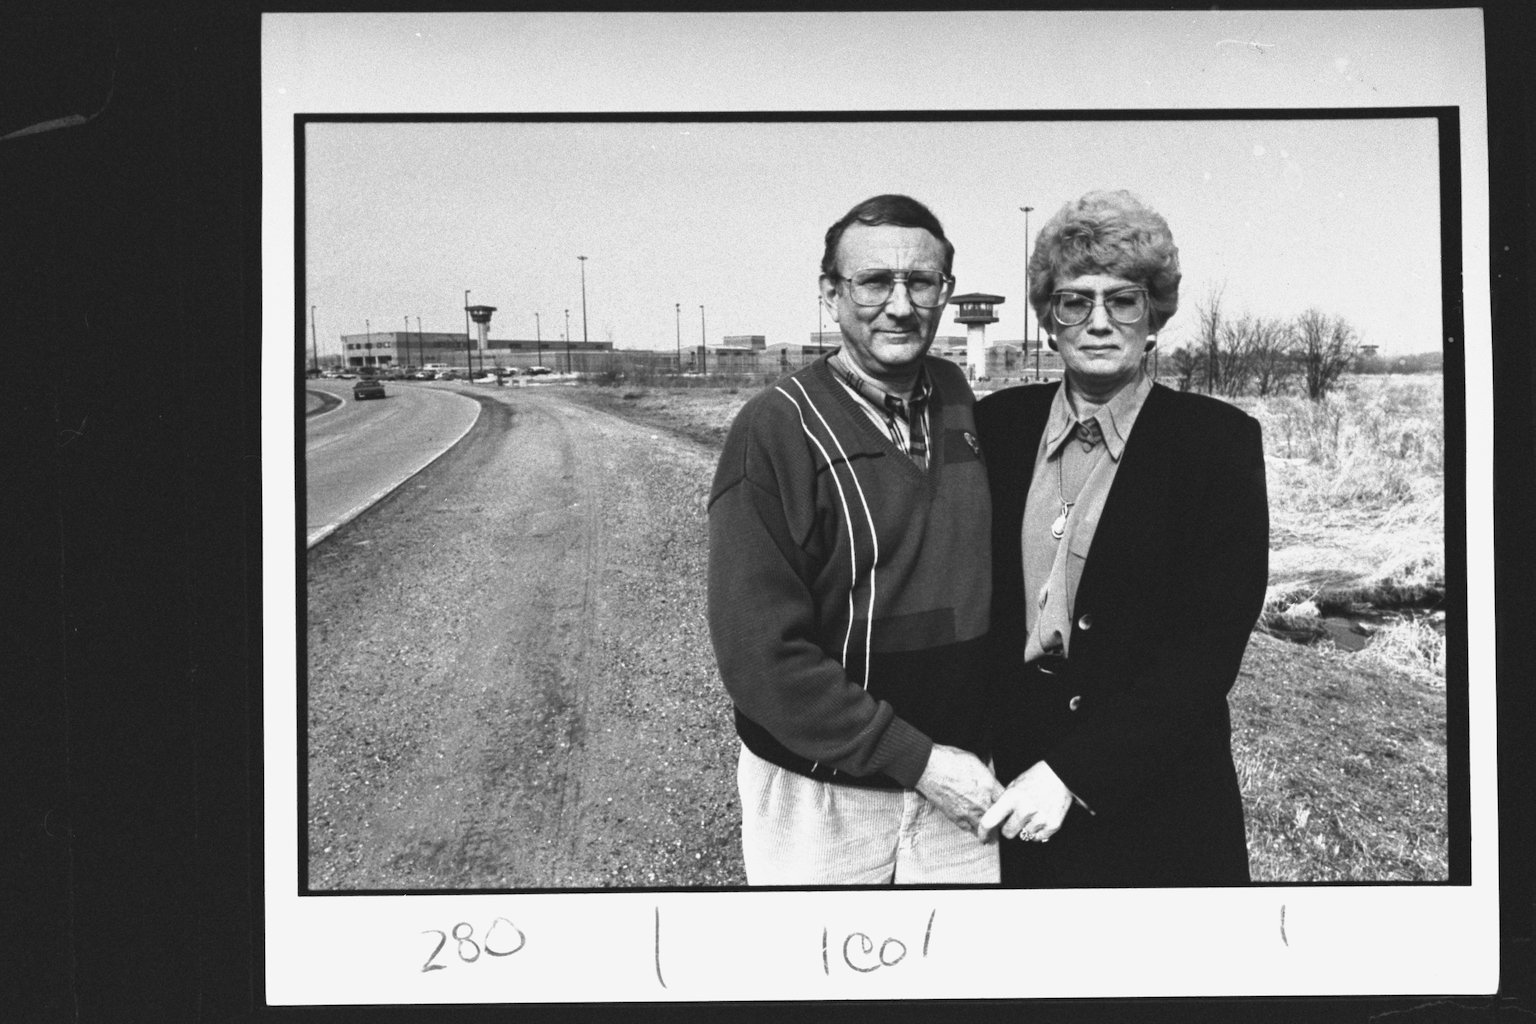 A black and white photo of Jeffrey Dahmer's father, Lion Dahmer, holding hands with his wife, Shari Dahmer